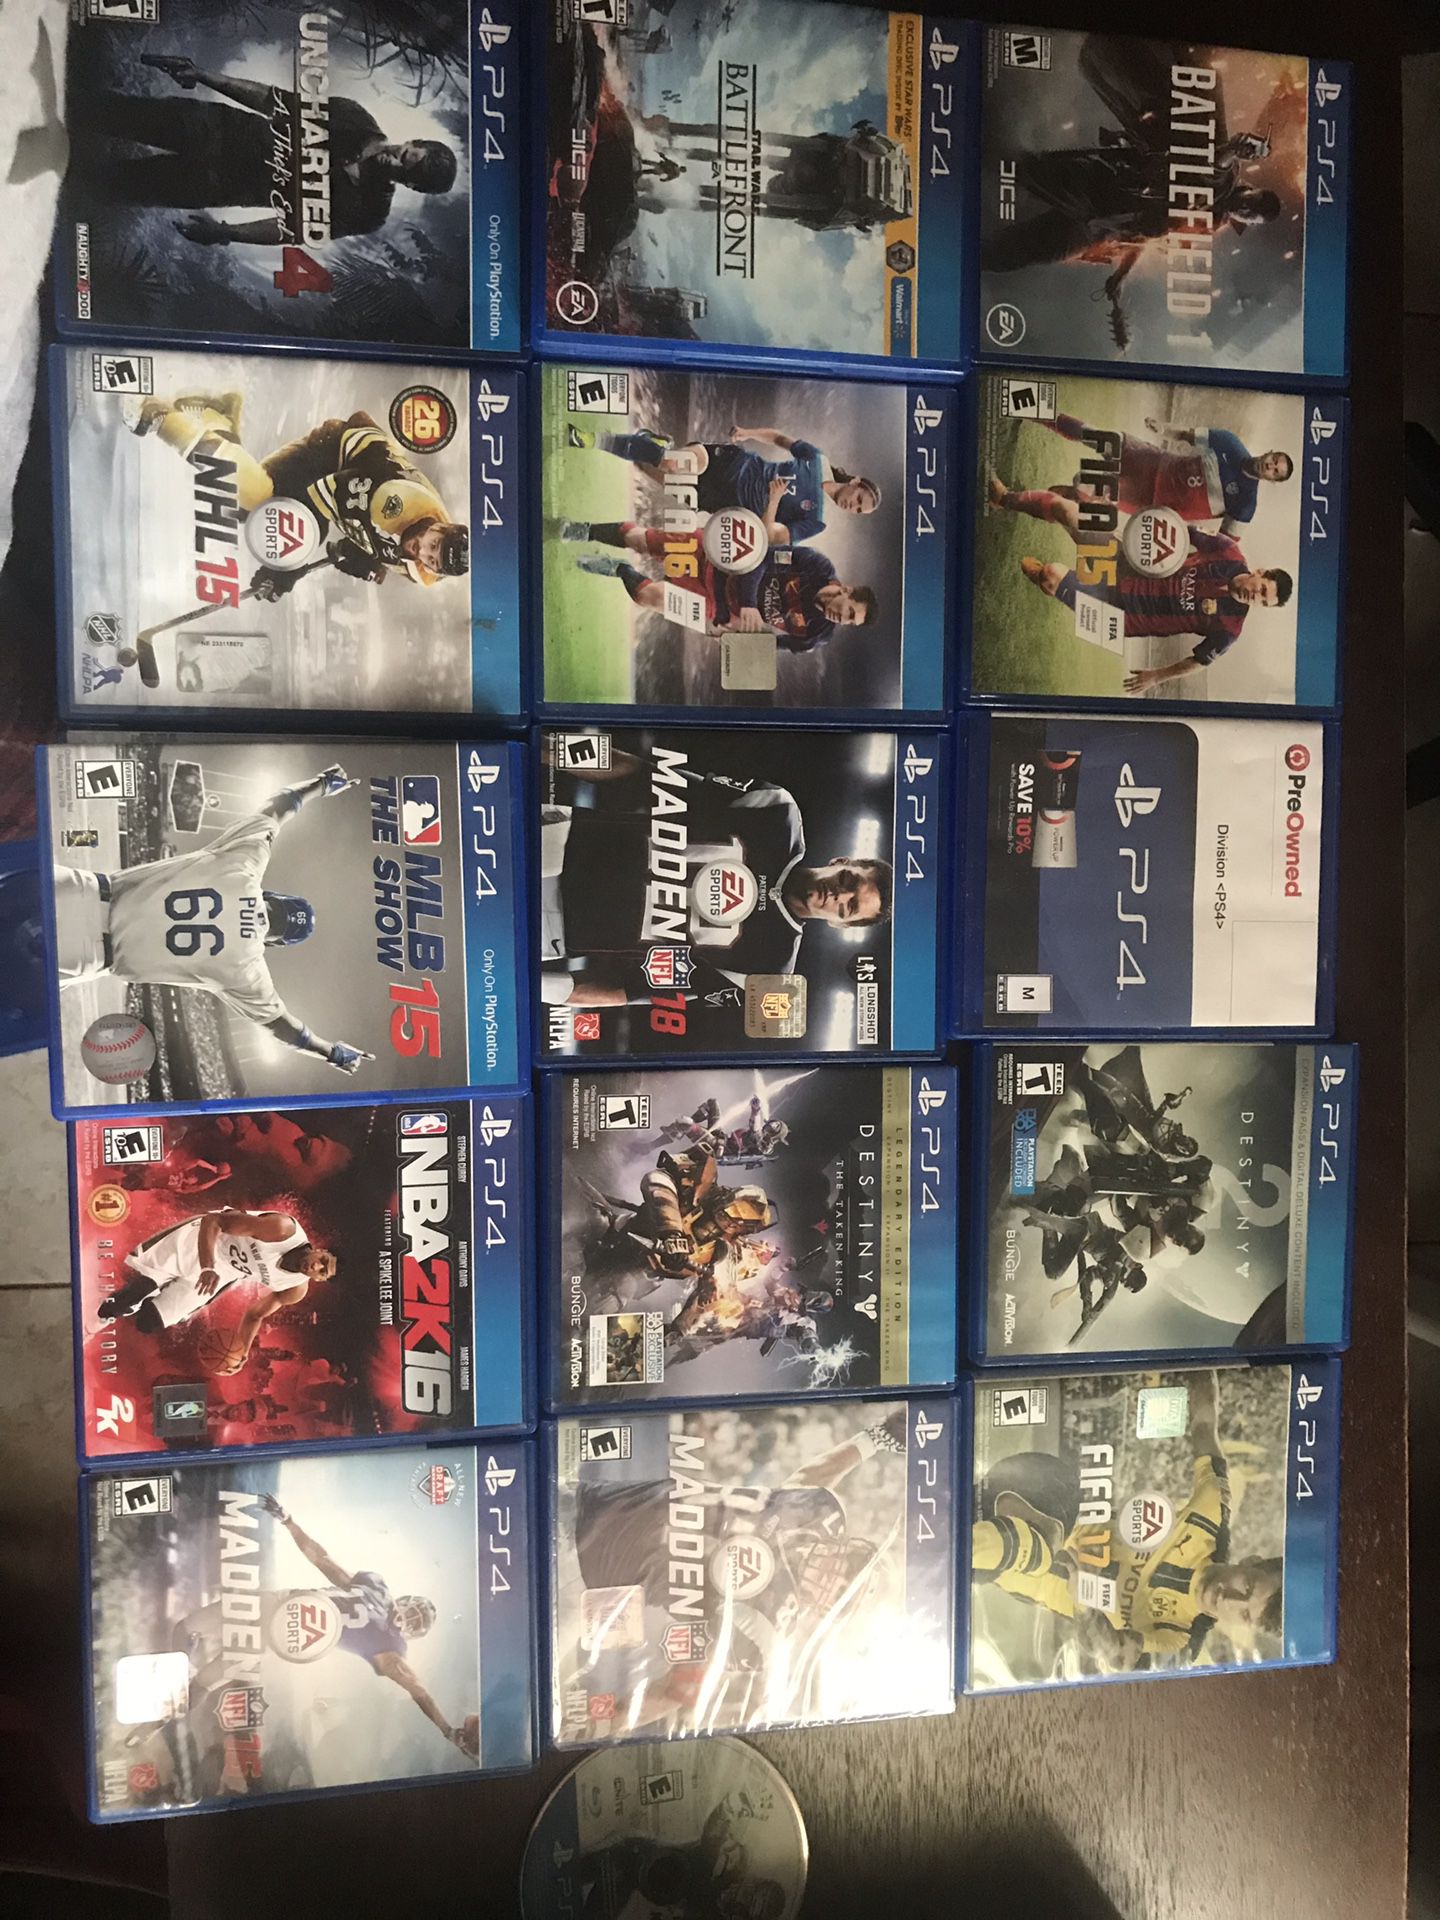 PS4 games with Delivery In Kissimmee areas included .